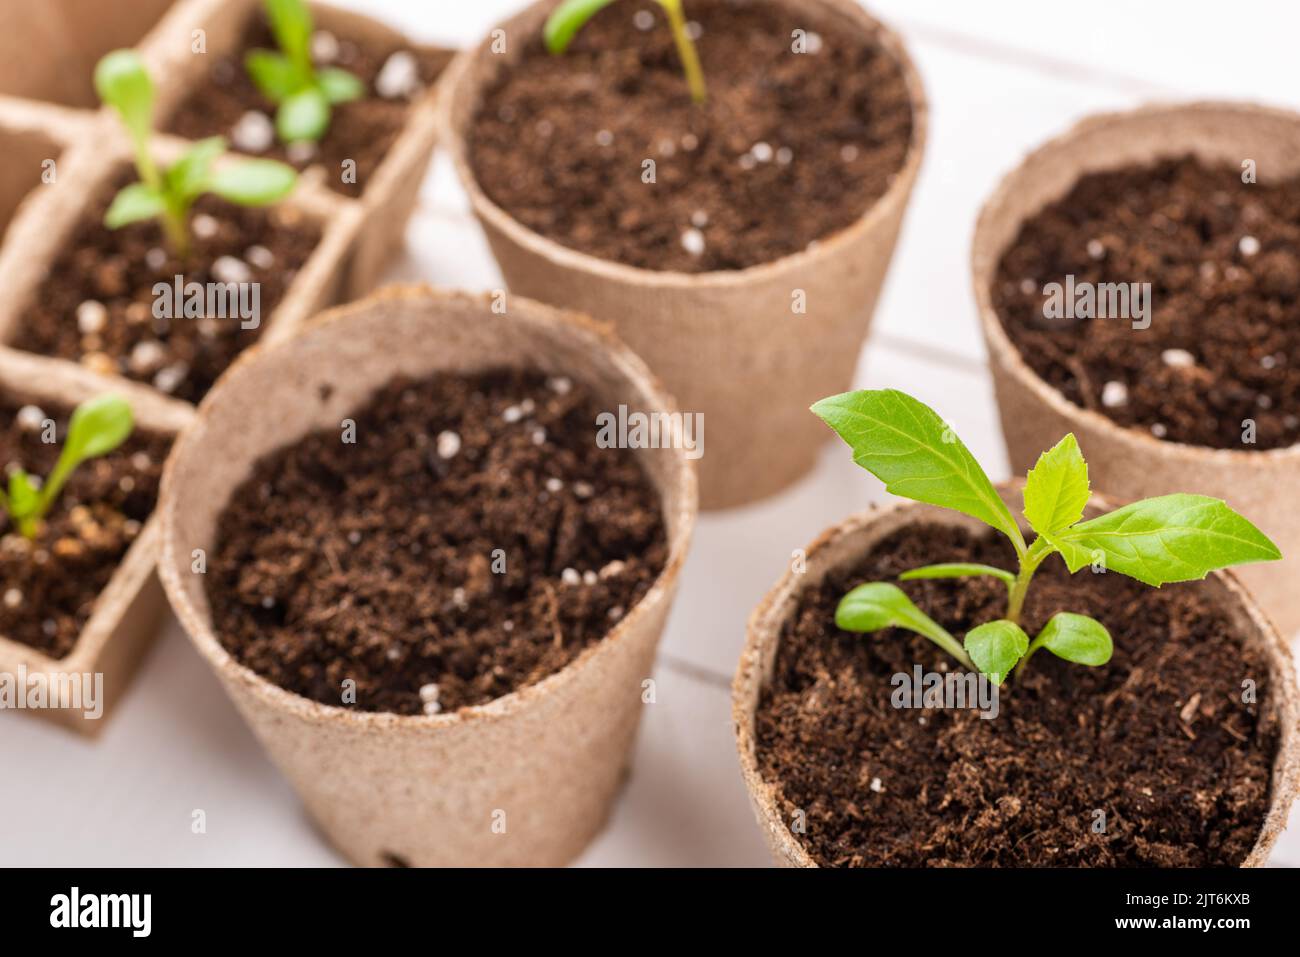 Potted flower seedlings growing in biodegradable peat moss pots on white wooden background. Zero waste, recycling, plastic free gardening concept back Stock Photo